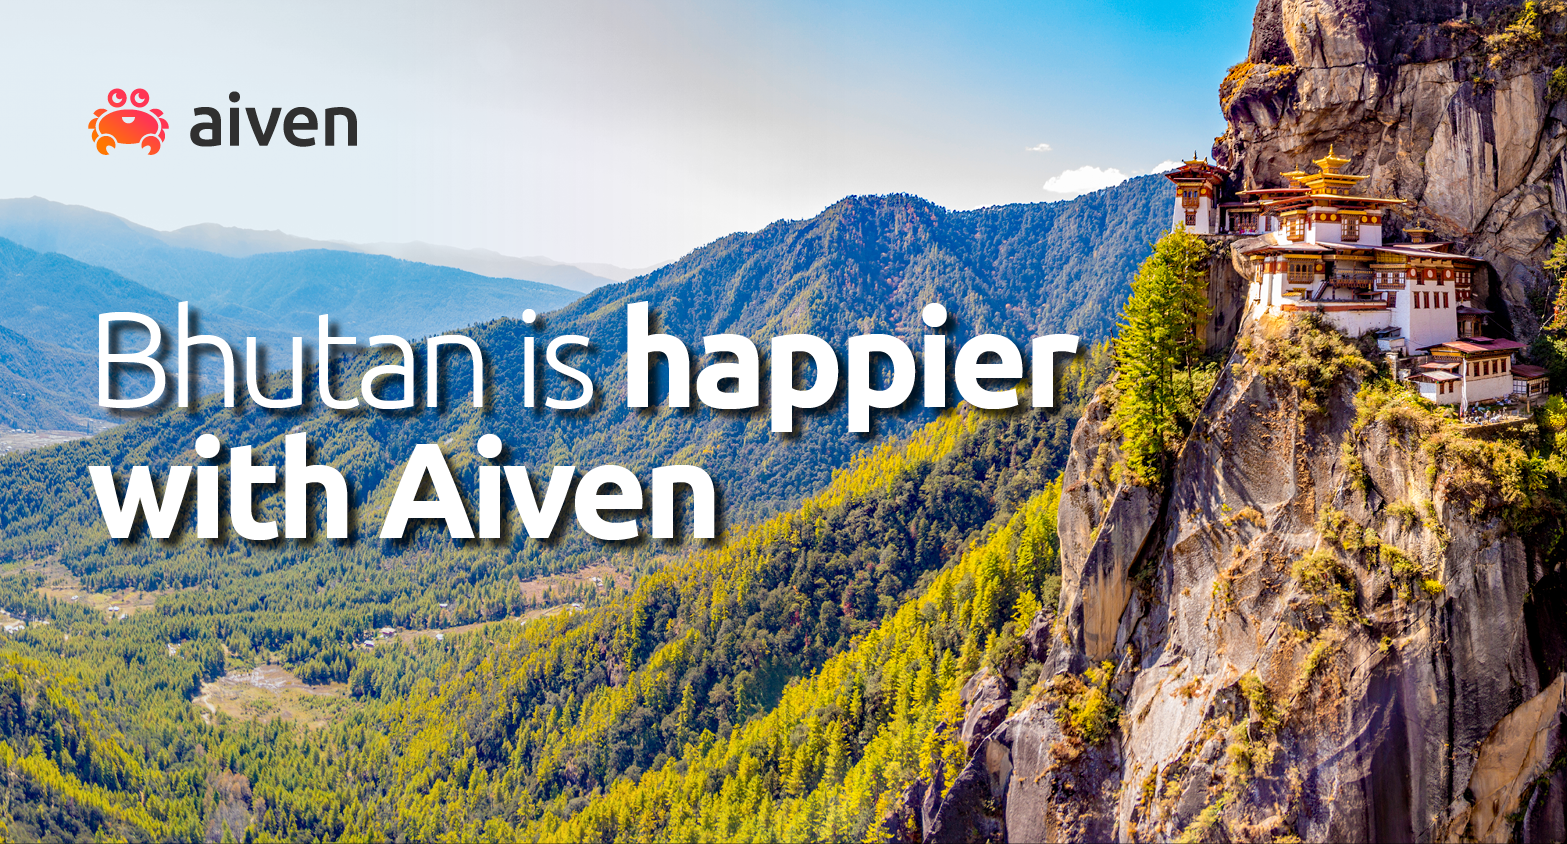 Aiven enhances happiness in the Himalayas illustration